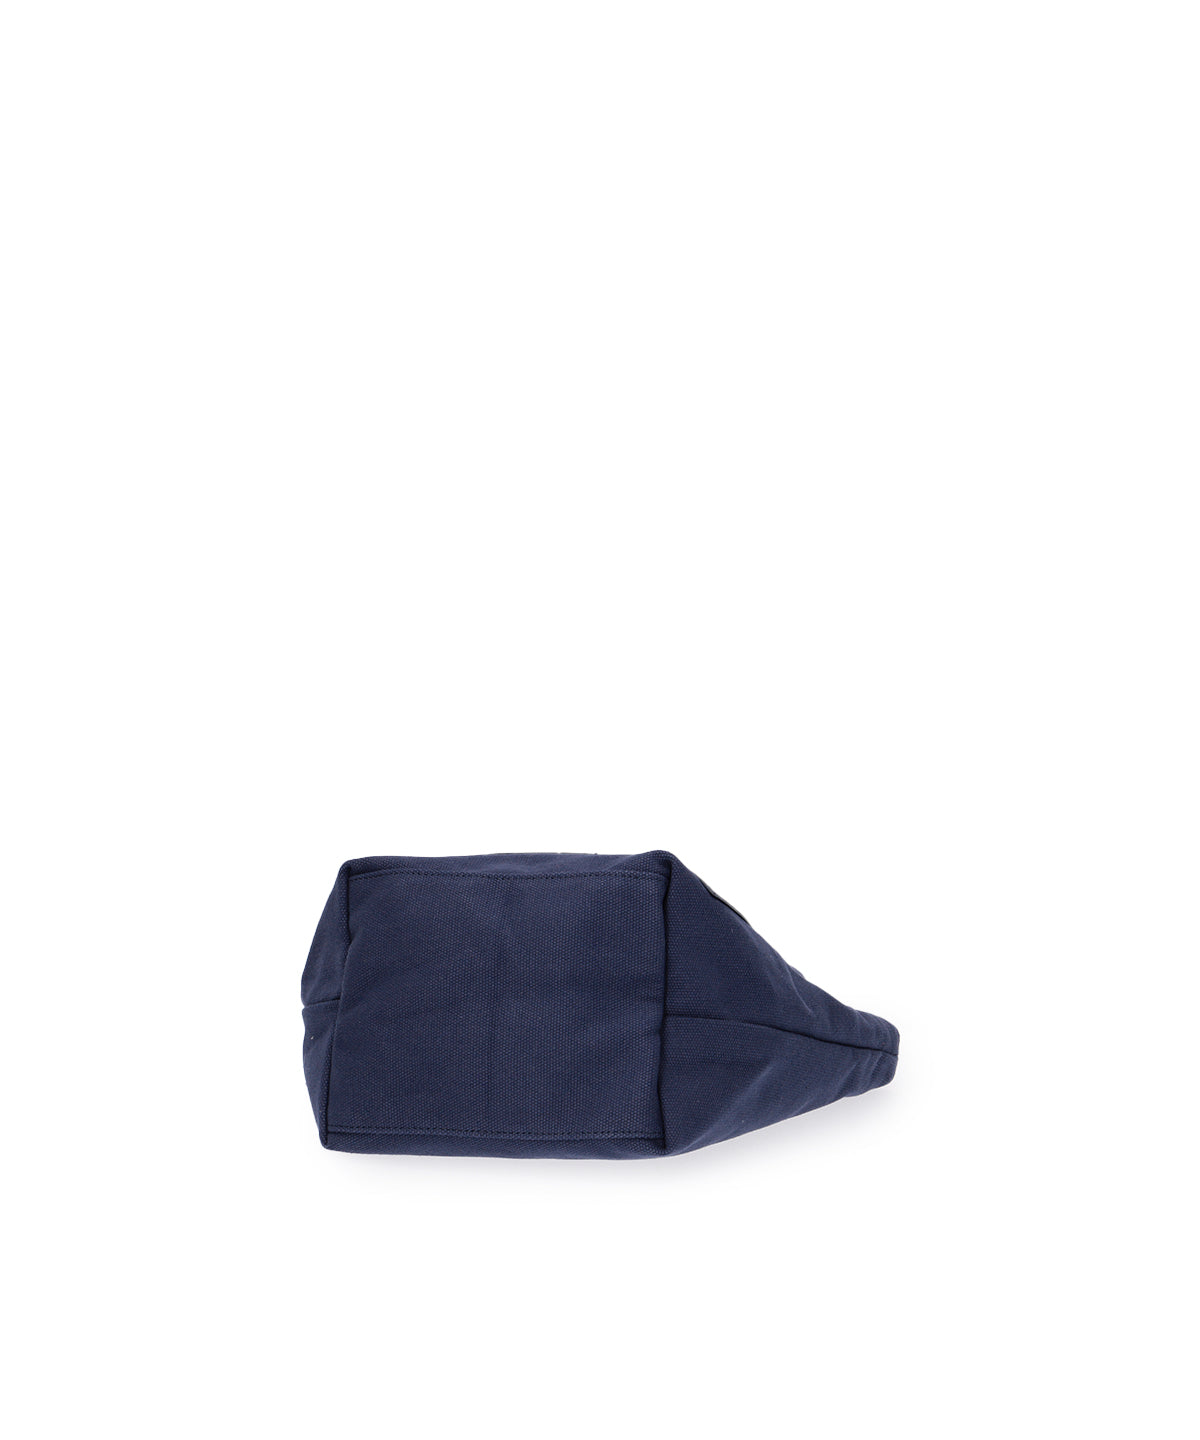 Colored Canvas Tote (Small) NAVY